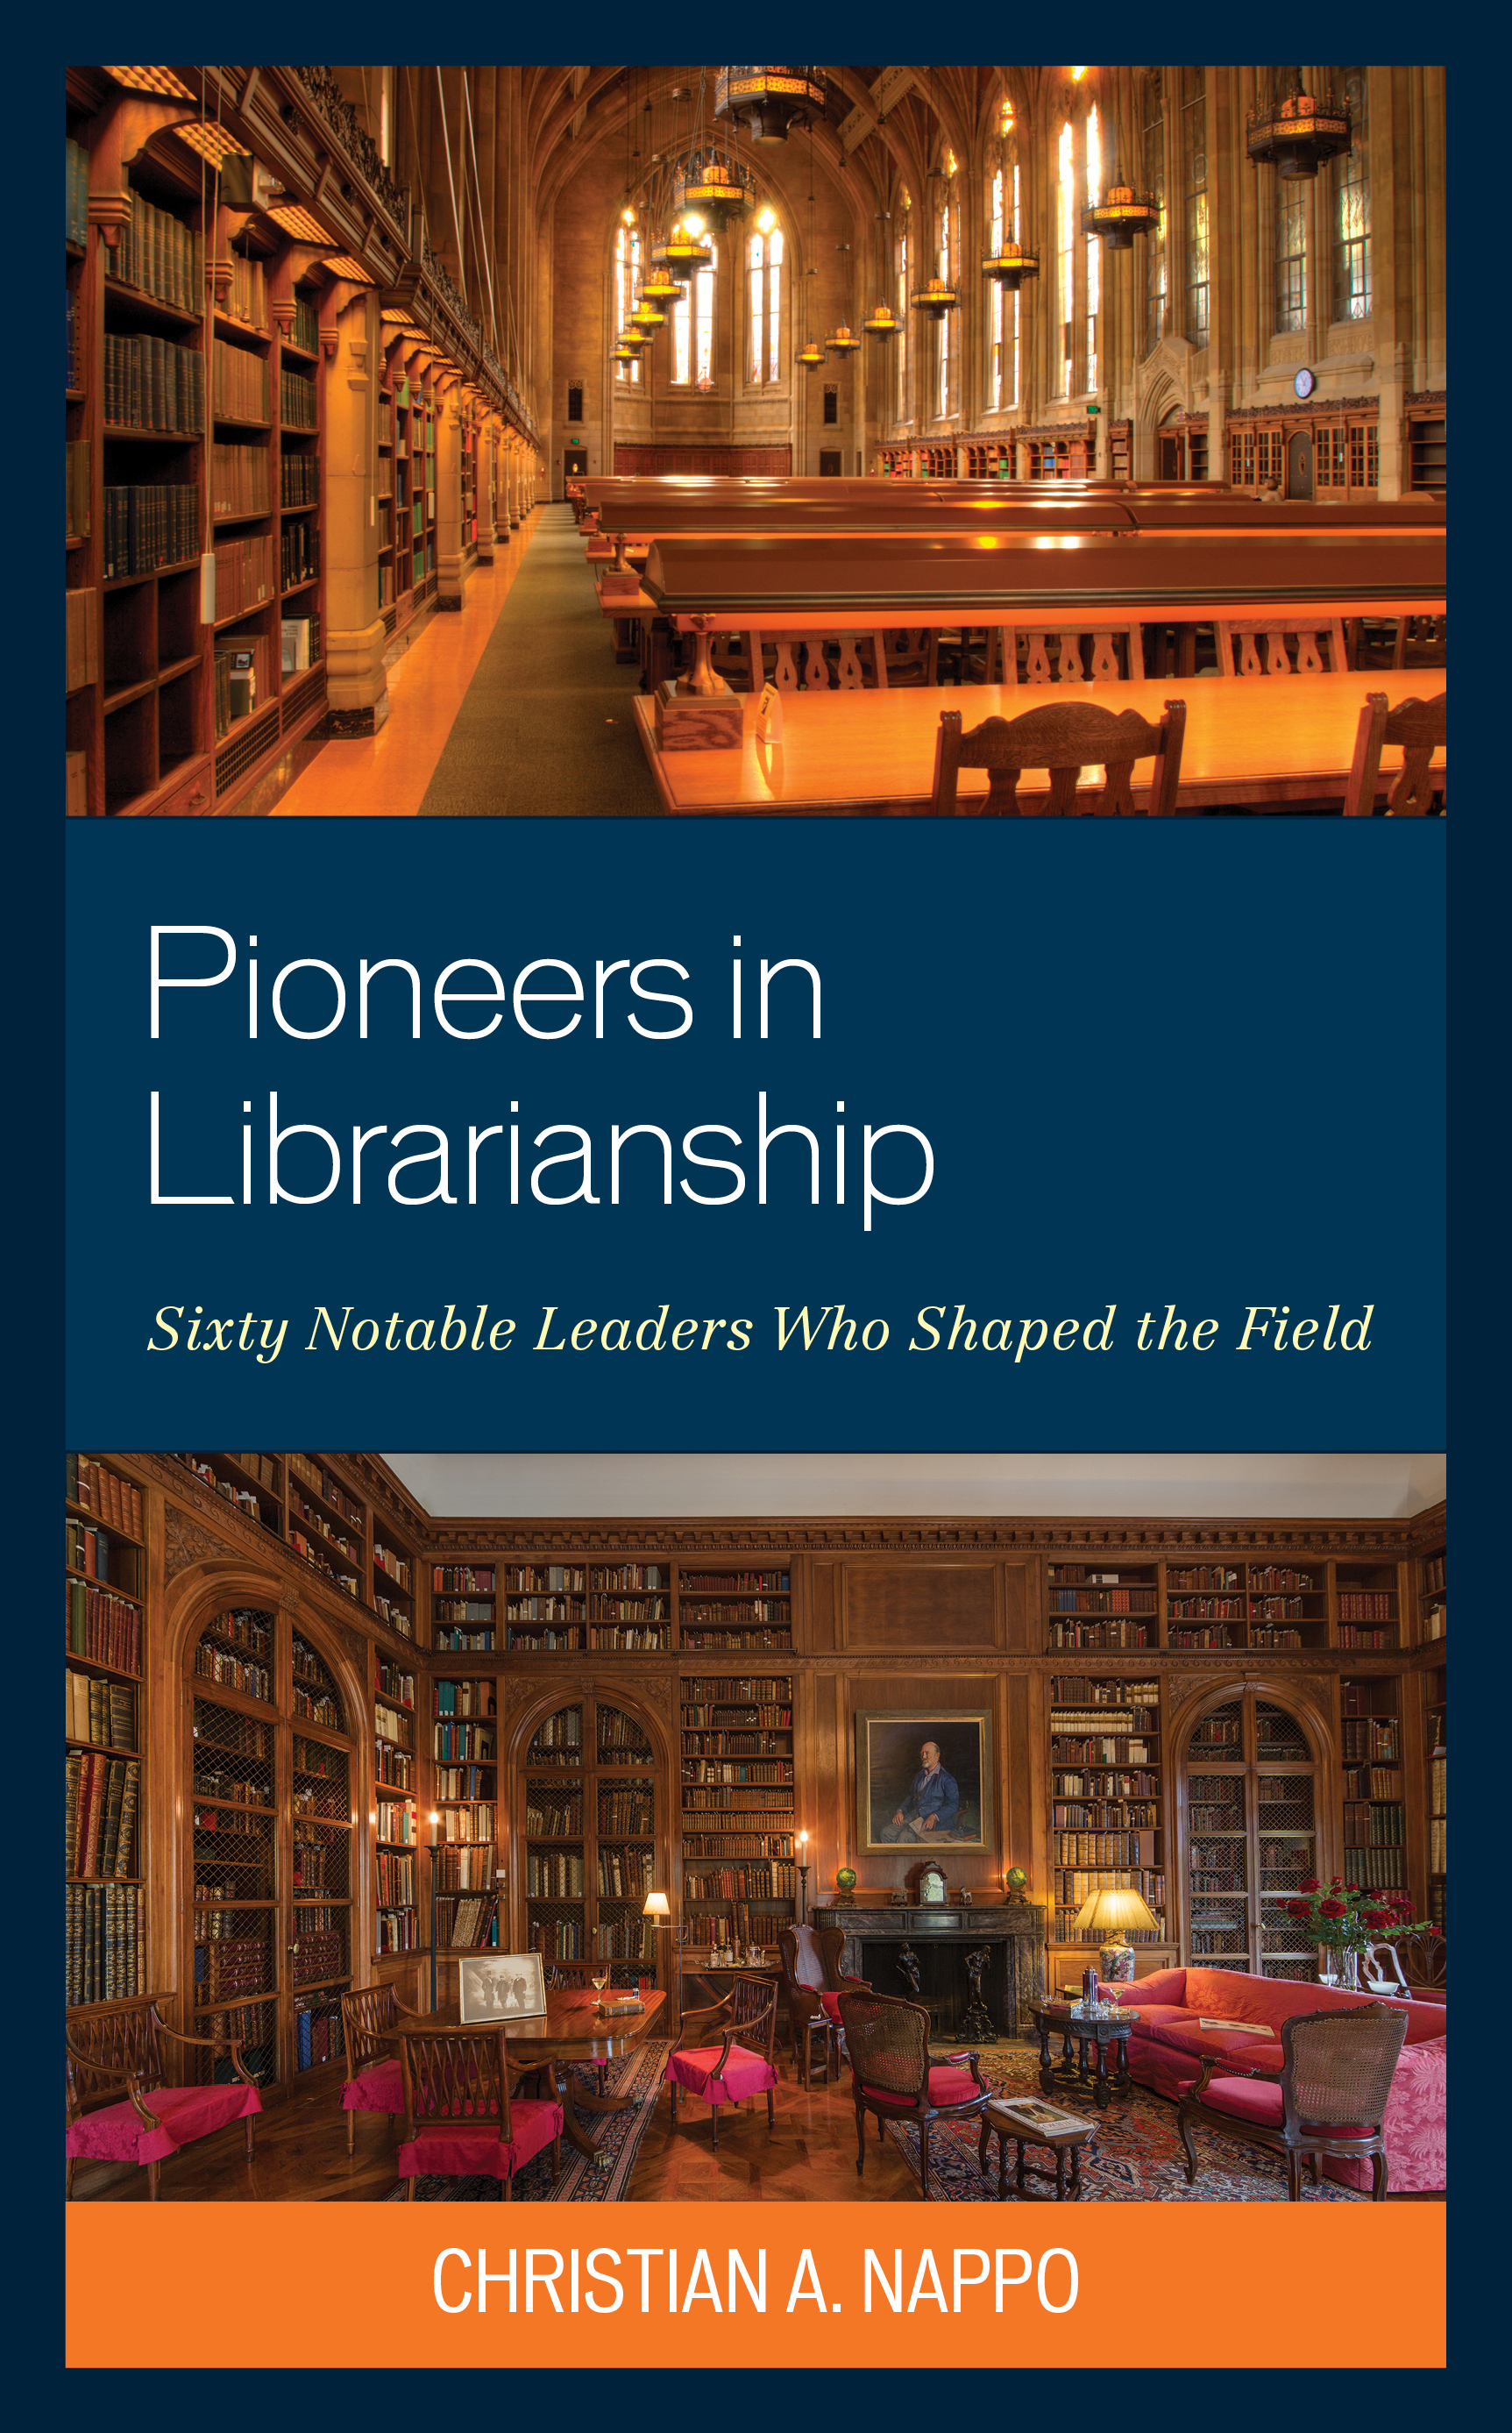 Pioneers in Librarianship: Sixty Notable Leaders Who Shaped the Field